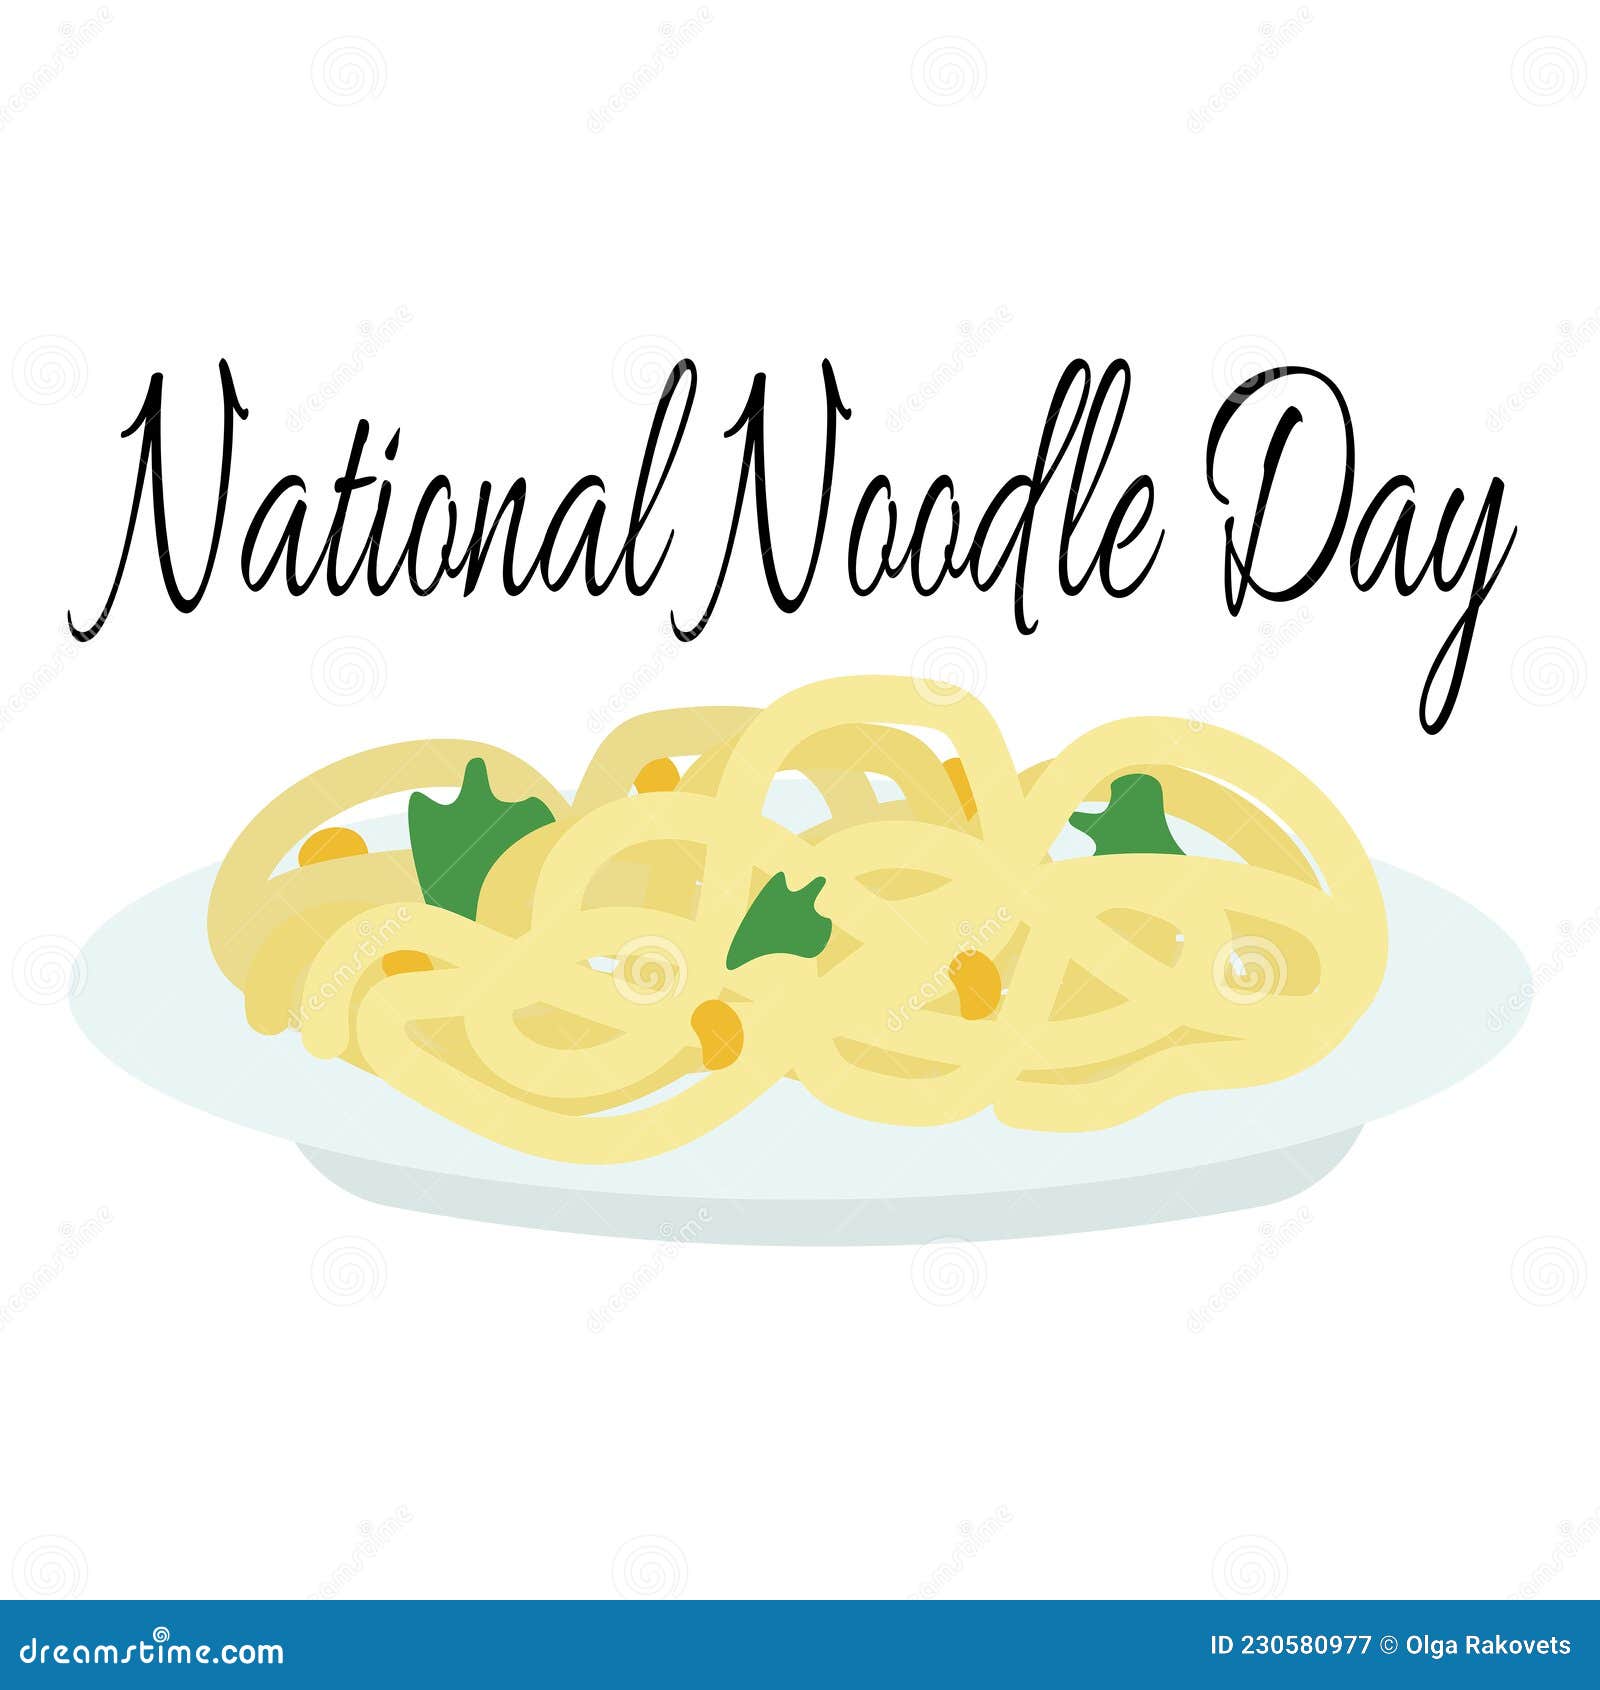 National Noodle Day, Idea for Poster, Banner or Menu Design, Dish in a